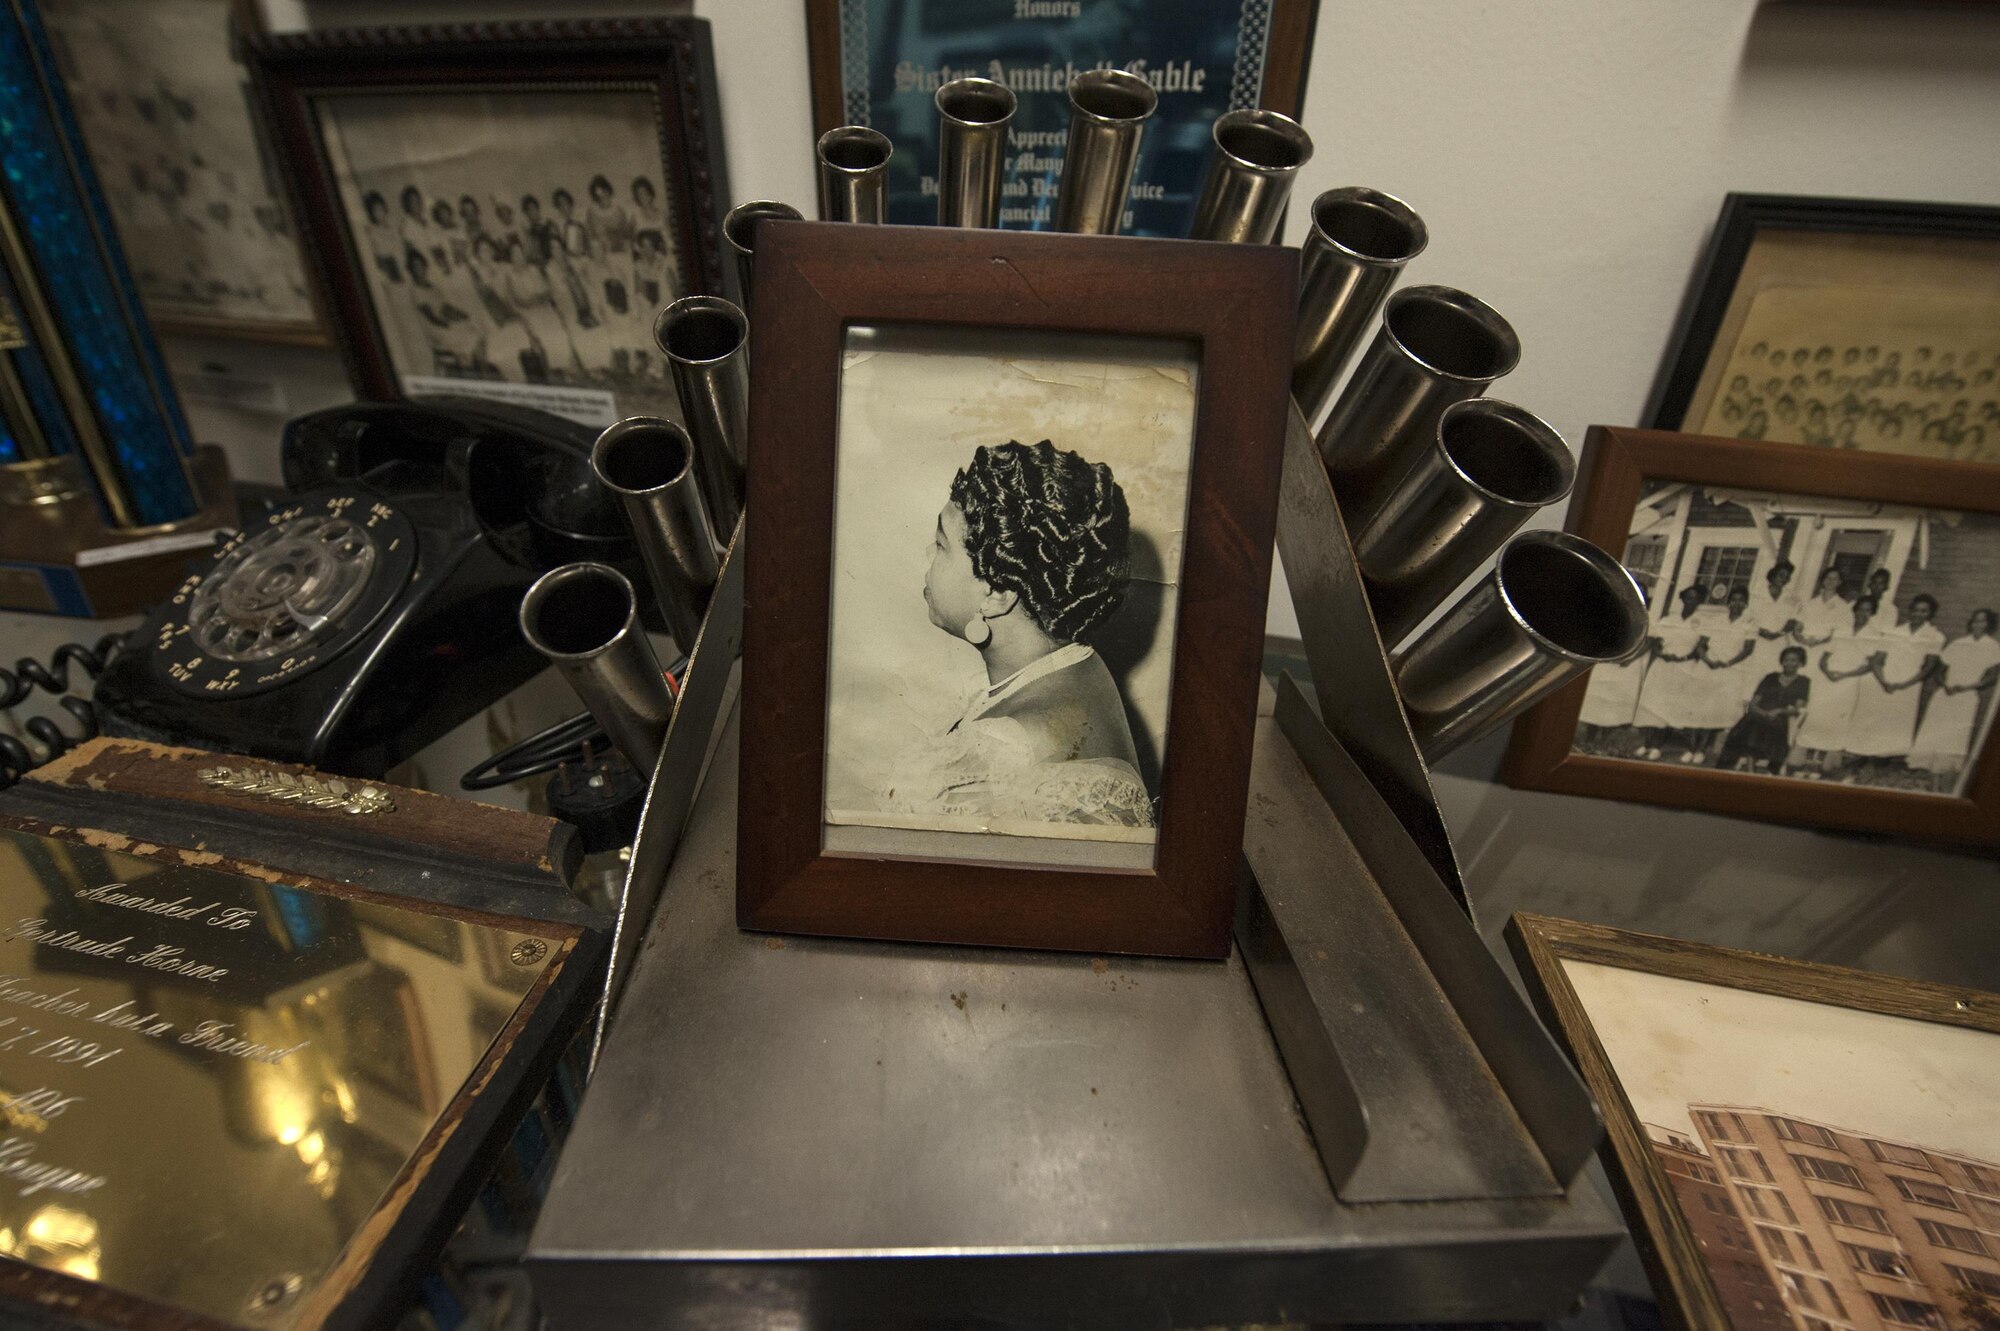 An antique curling iron holder and a photo of a finished hairstyle rest on a display case Feb. 8, 2016, at the Jack Hadley Black History Museum in Thomasville, Ga. The Cosmetology and La Charme Beauty and Culture School section of the museum showcases innovations and accomplishments made by black barbers and beauticians from Thomasville, Ga. (U.S. Air Force photo/Airman 1st Class Janiqua P. Robinson)